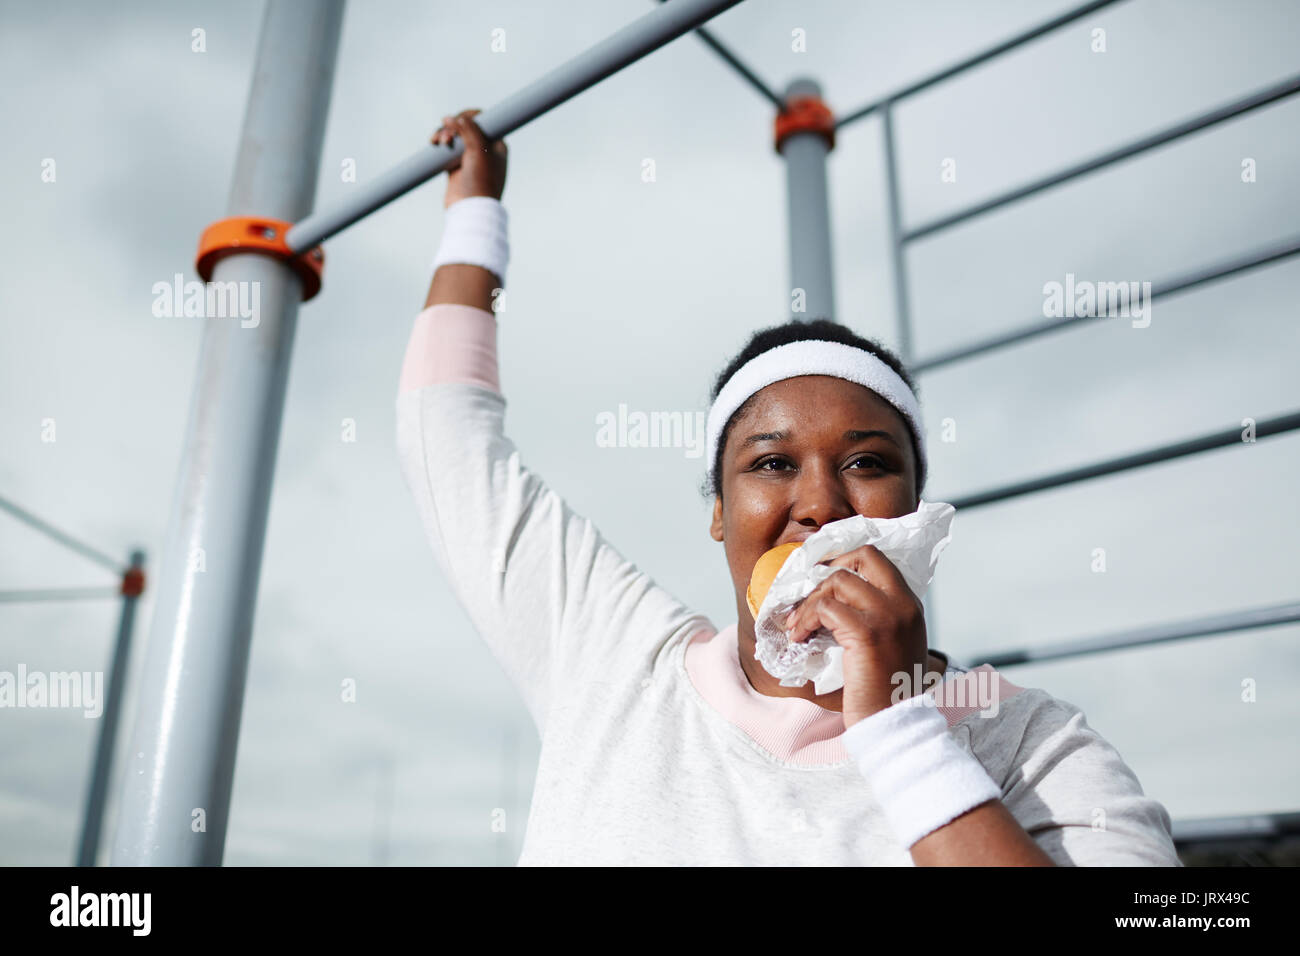 Plump African woman eating unhealthy burger while practicing pull-up exercise Stock Photo